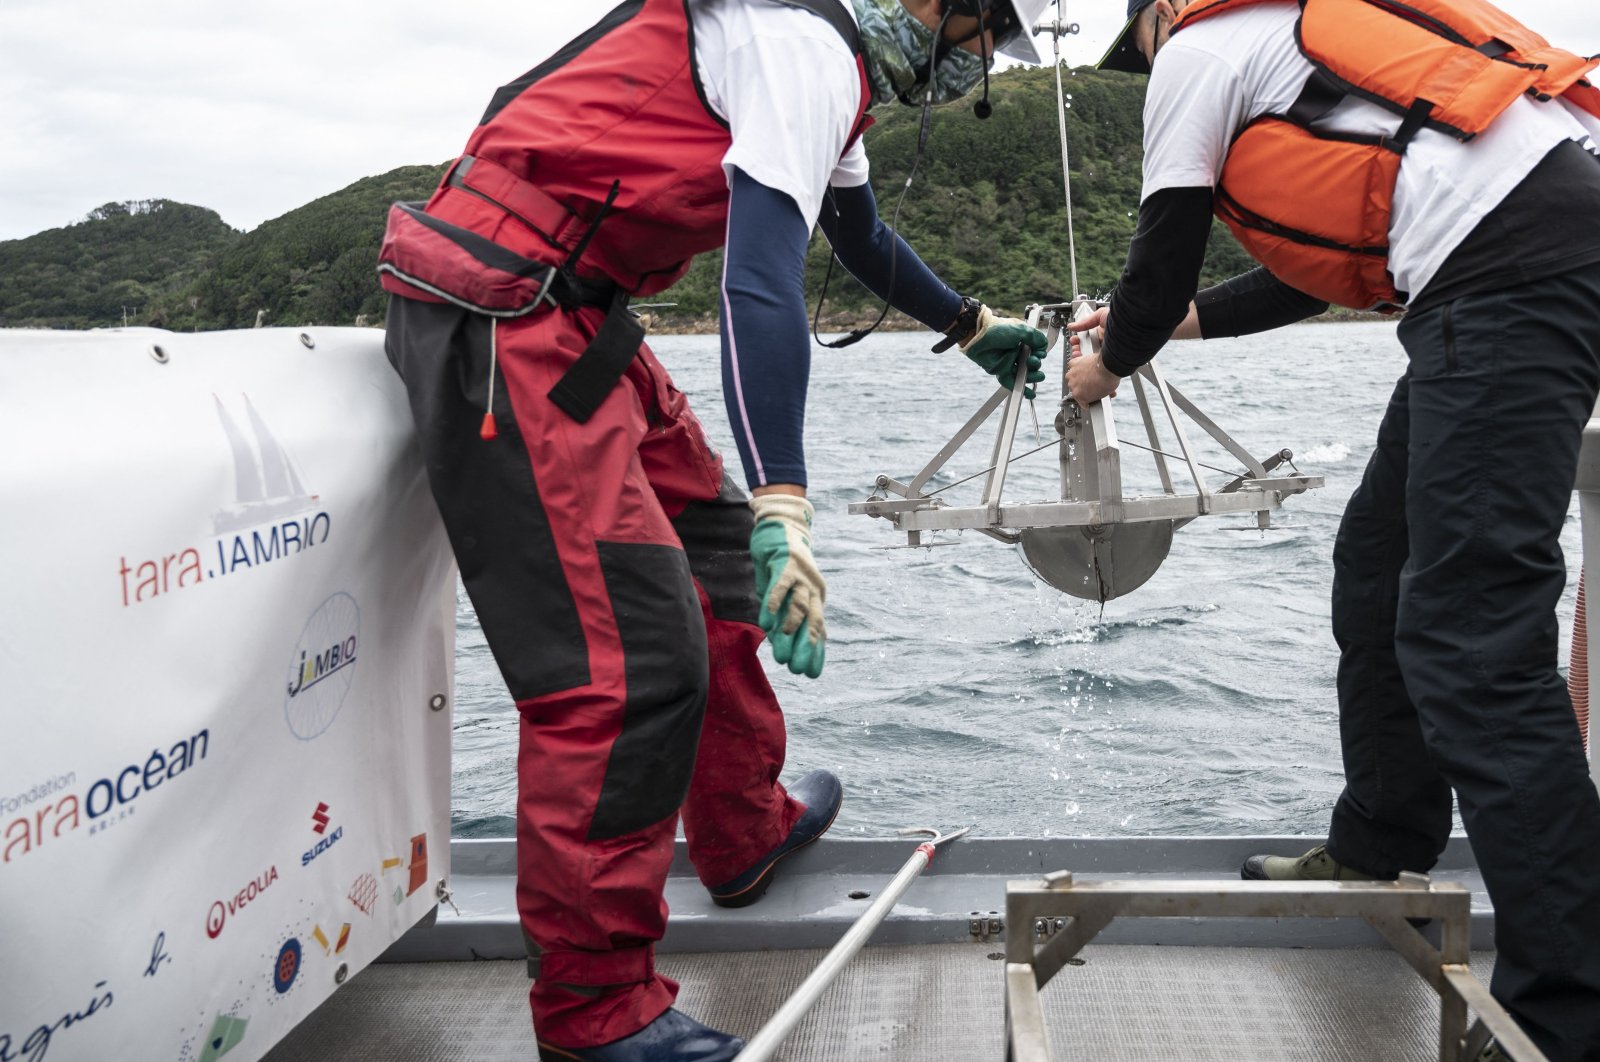 Researchers pull out a "Smith-McIntyre" grab machine collecting sediment samples during a joint project of the French Tara Ocean Foundation and Japanese marine-station network Jambio, on board a boat off the coast of Shimoda, Shizuoka Prefecture, Japan, Oct. 14, 2021. (AFP Photo)